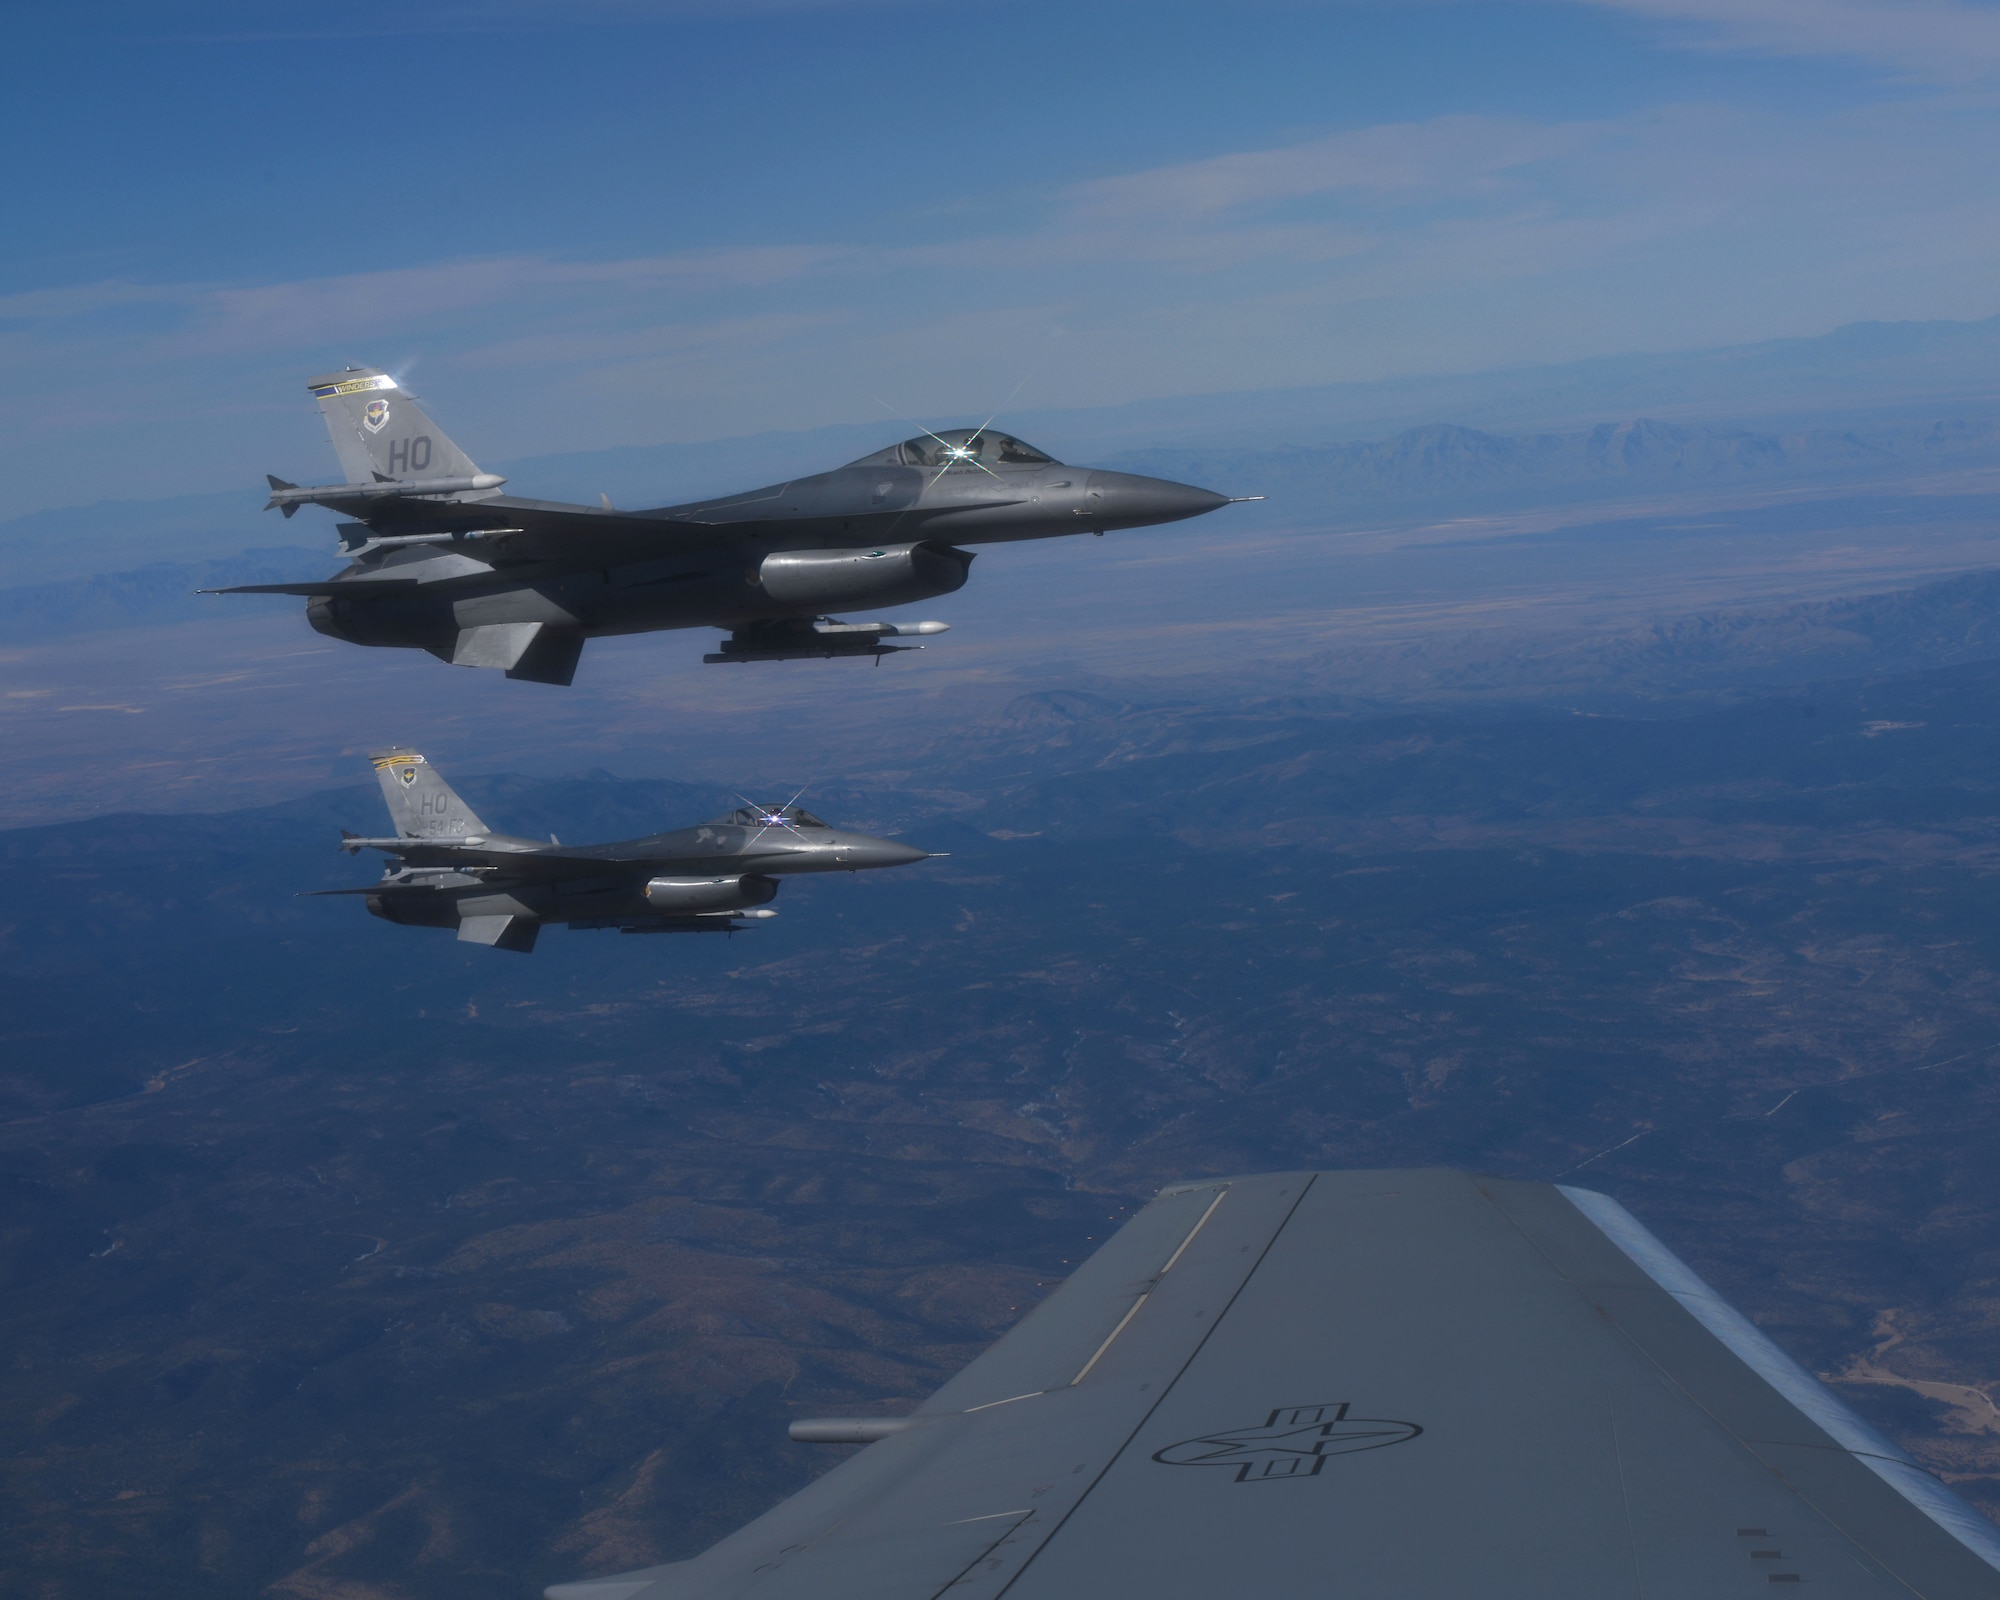 Over the mountains of southern New Mexico, two F-16 Fighting Falcons from the 49th Wing at Holloman Air Force Base (AFB), New Mexico, fly off the left wing of a KC-46 Pegasus from the 56th Air Refueling Squadron (ARS) at Altus AFB, Oklahoma, December 7, 2020. This is the first time KC-46s from the 56 ARS have worked with fighter aircraft. (U.S. Air Force photo by Tech. Sgt. Robert Sizelove)